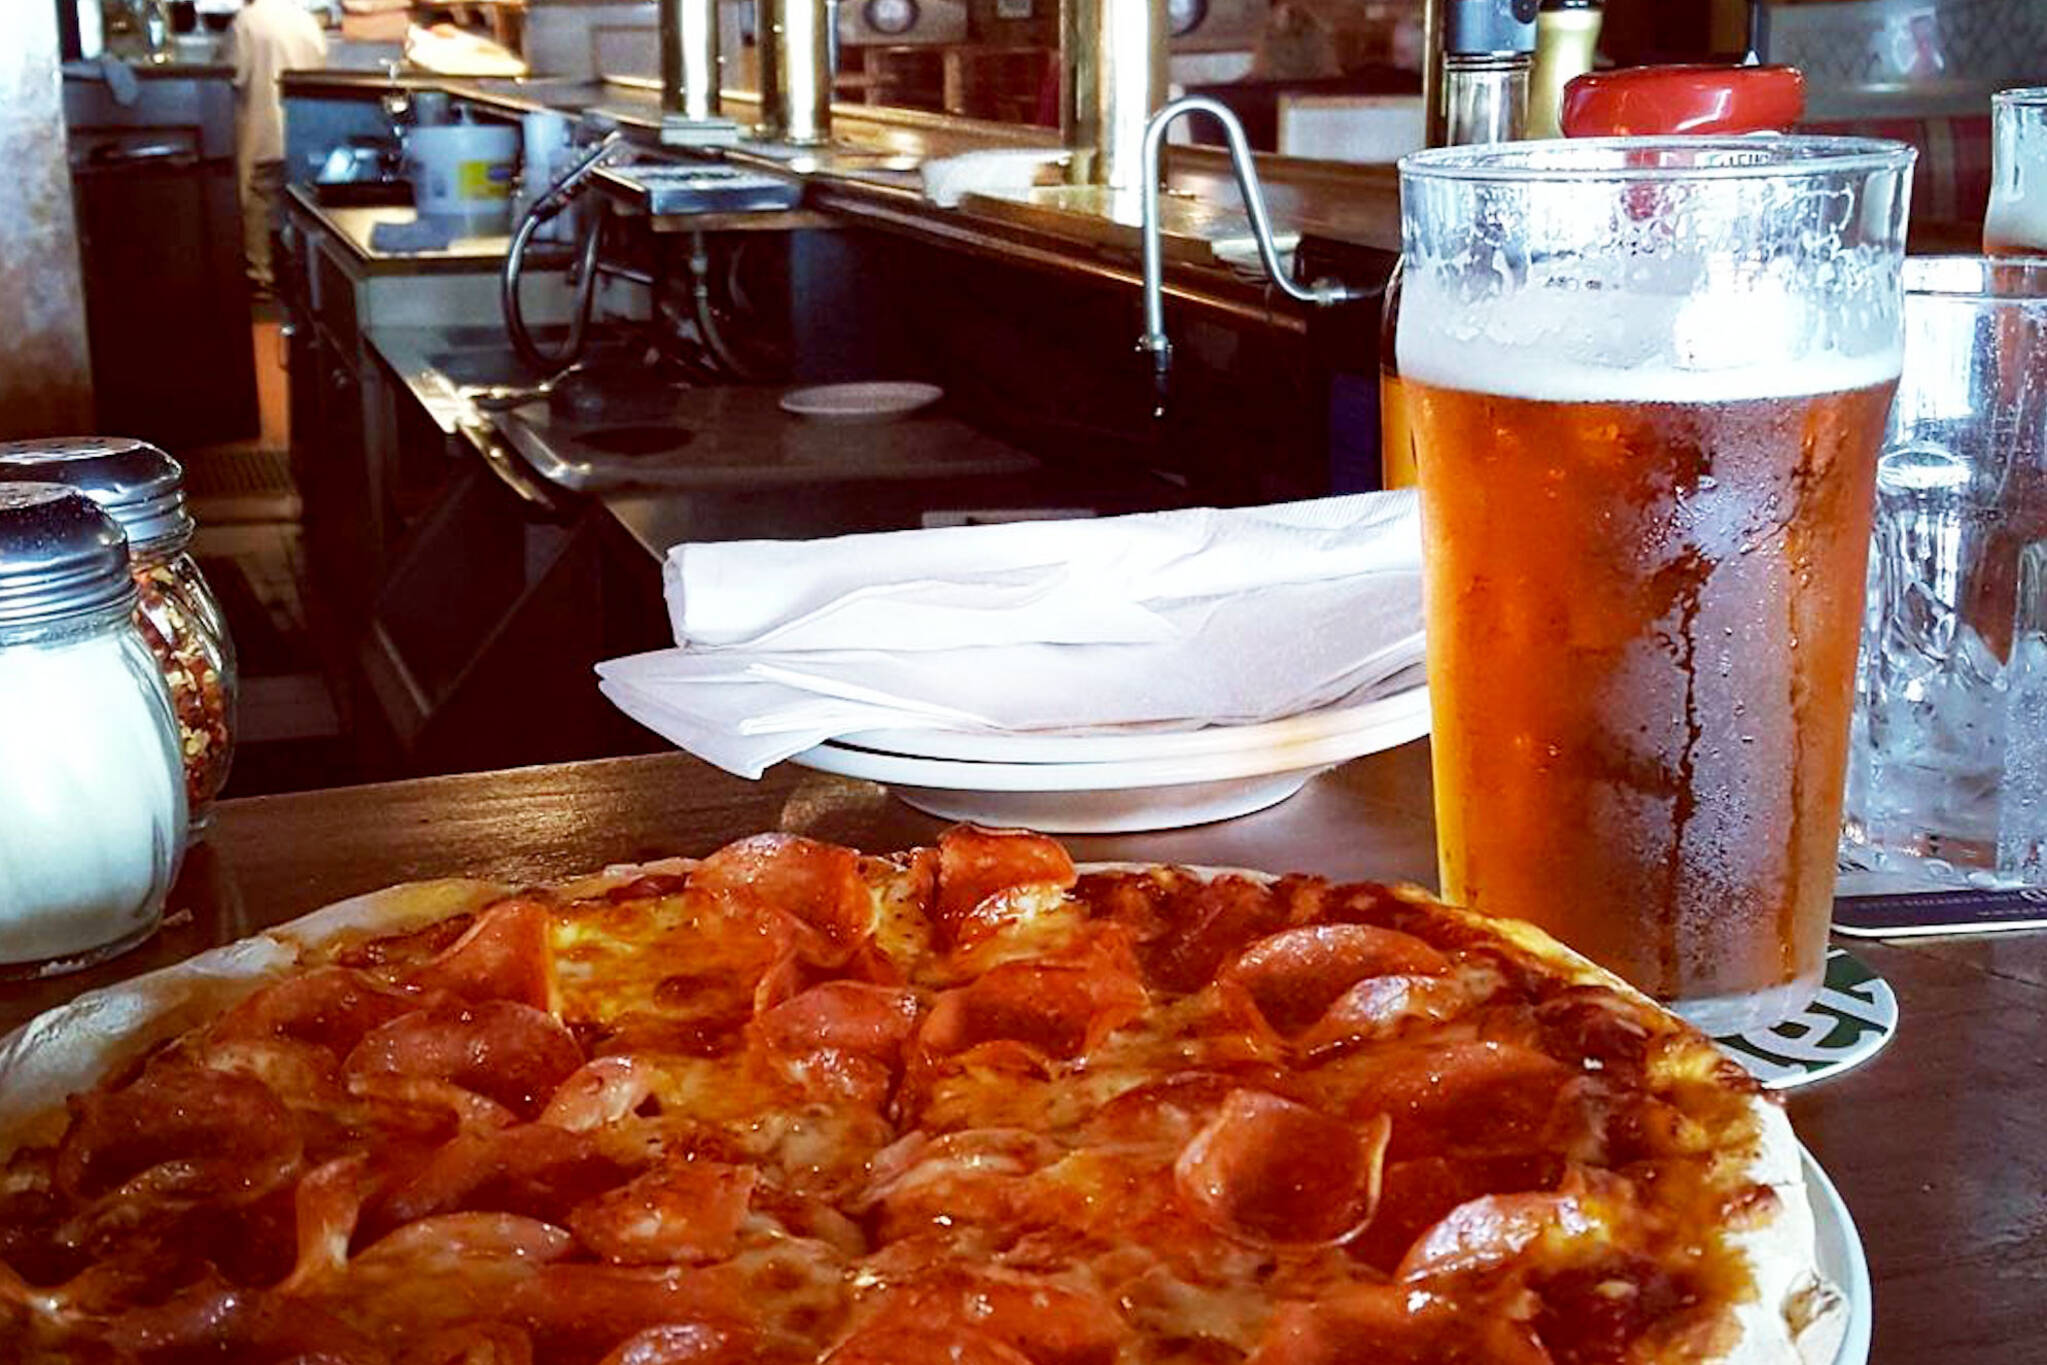 Toronto's original beer and pizza pub is closing after 30 years